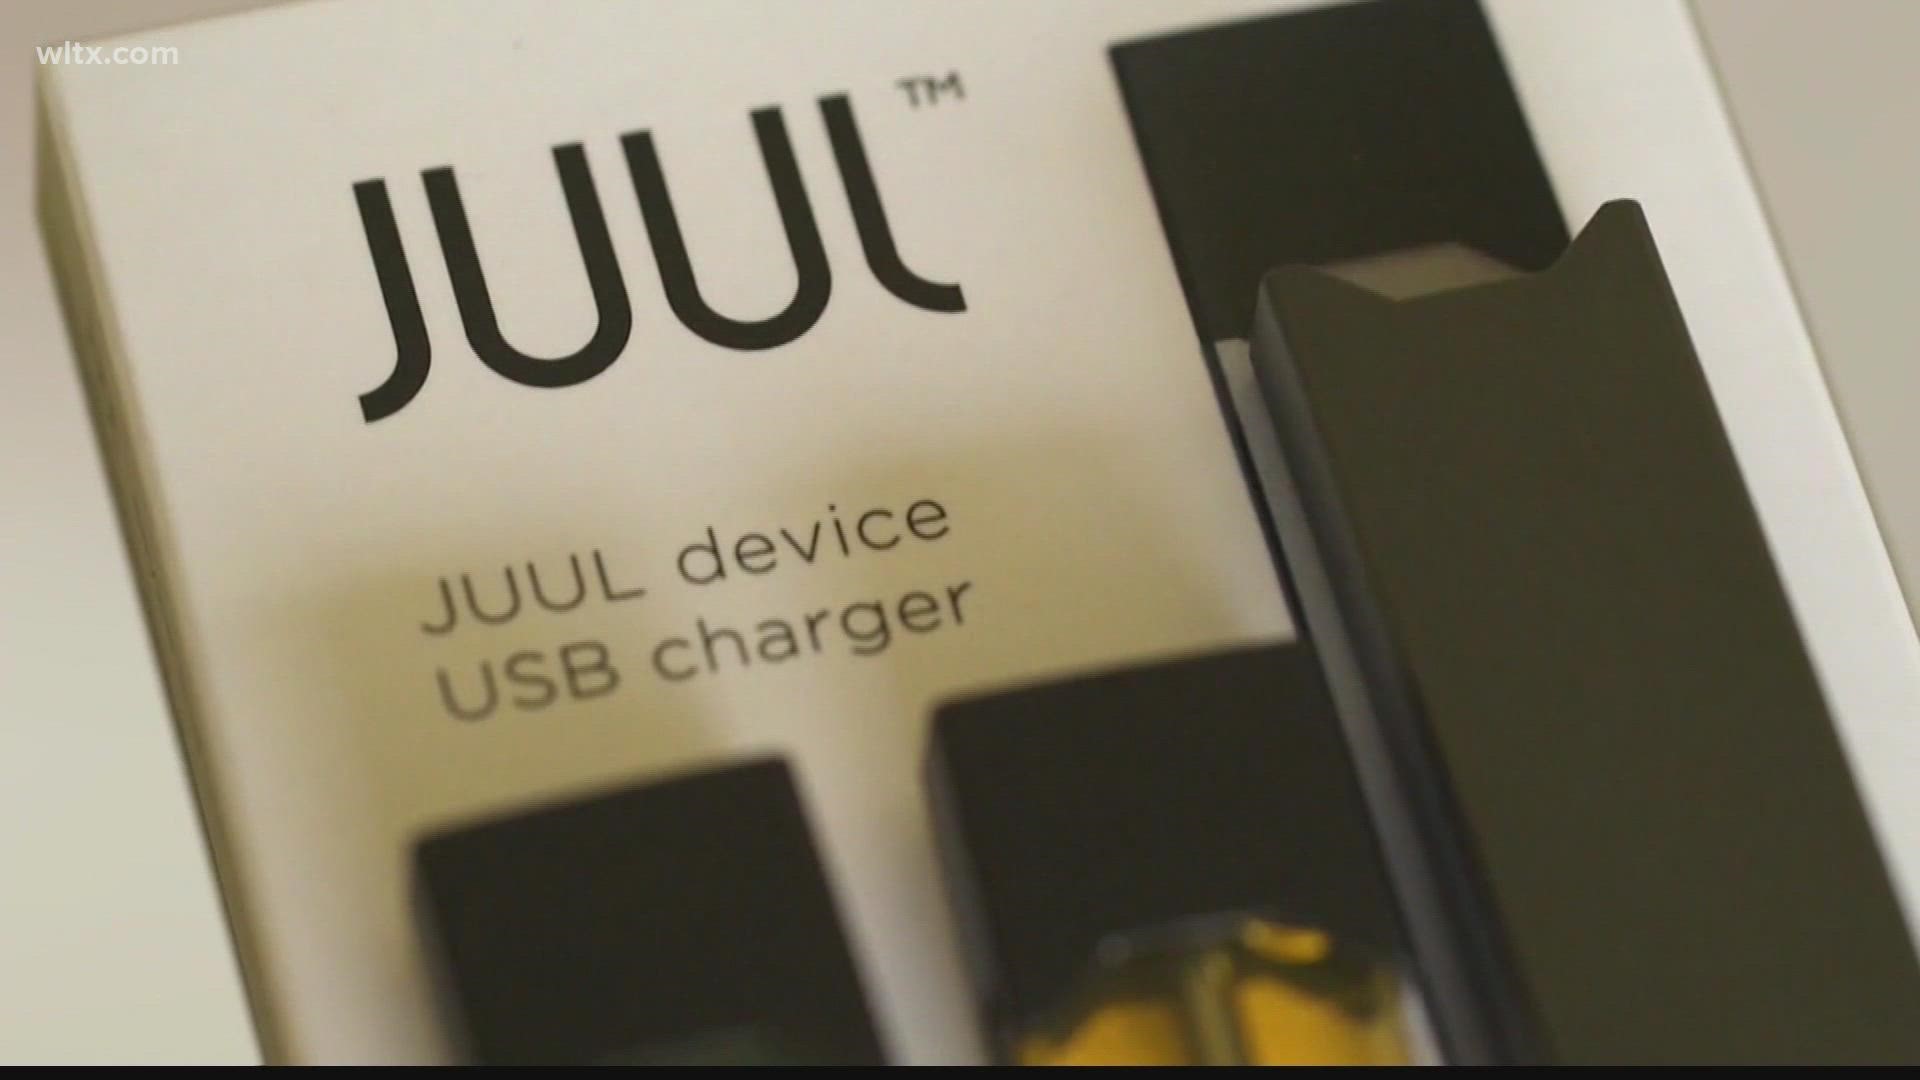 Federal health officials on Thursday ordered Juul to pull its electronic cigarettes from the U.S. market.